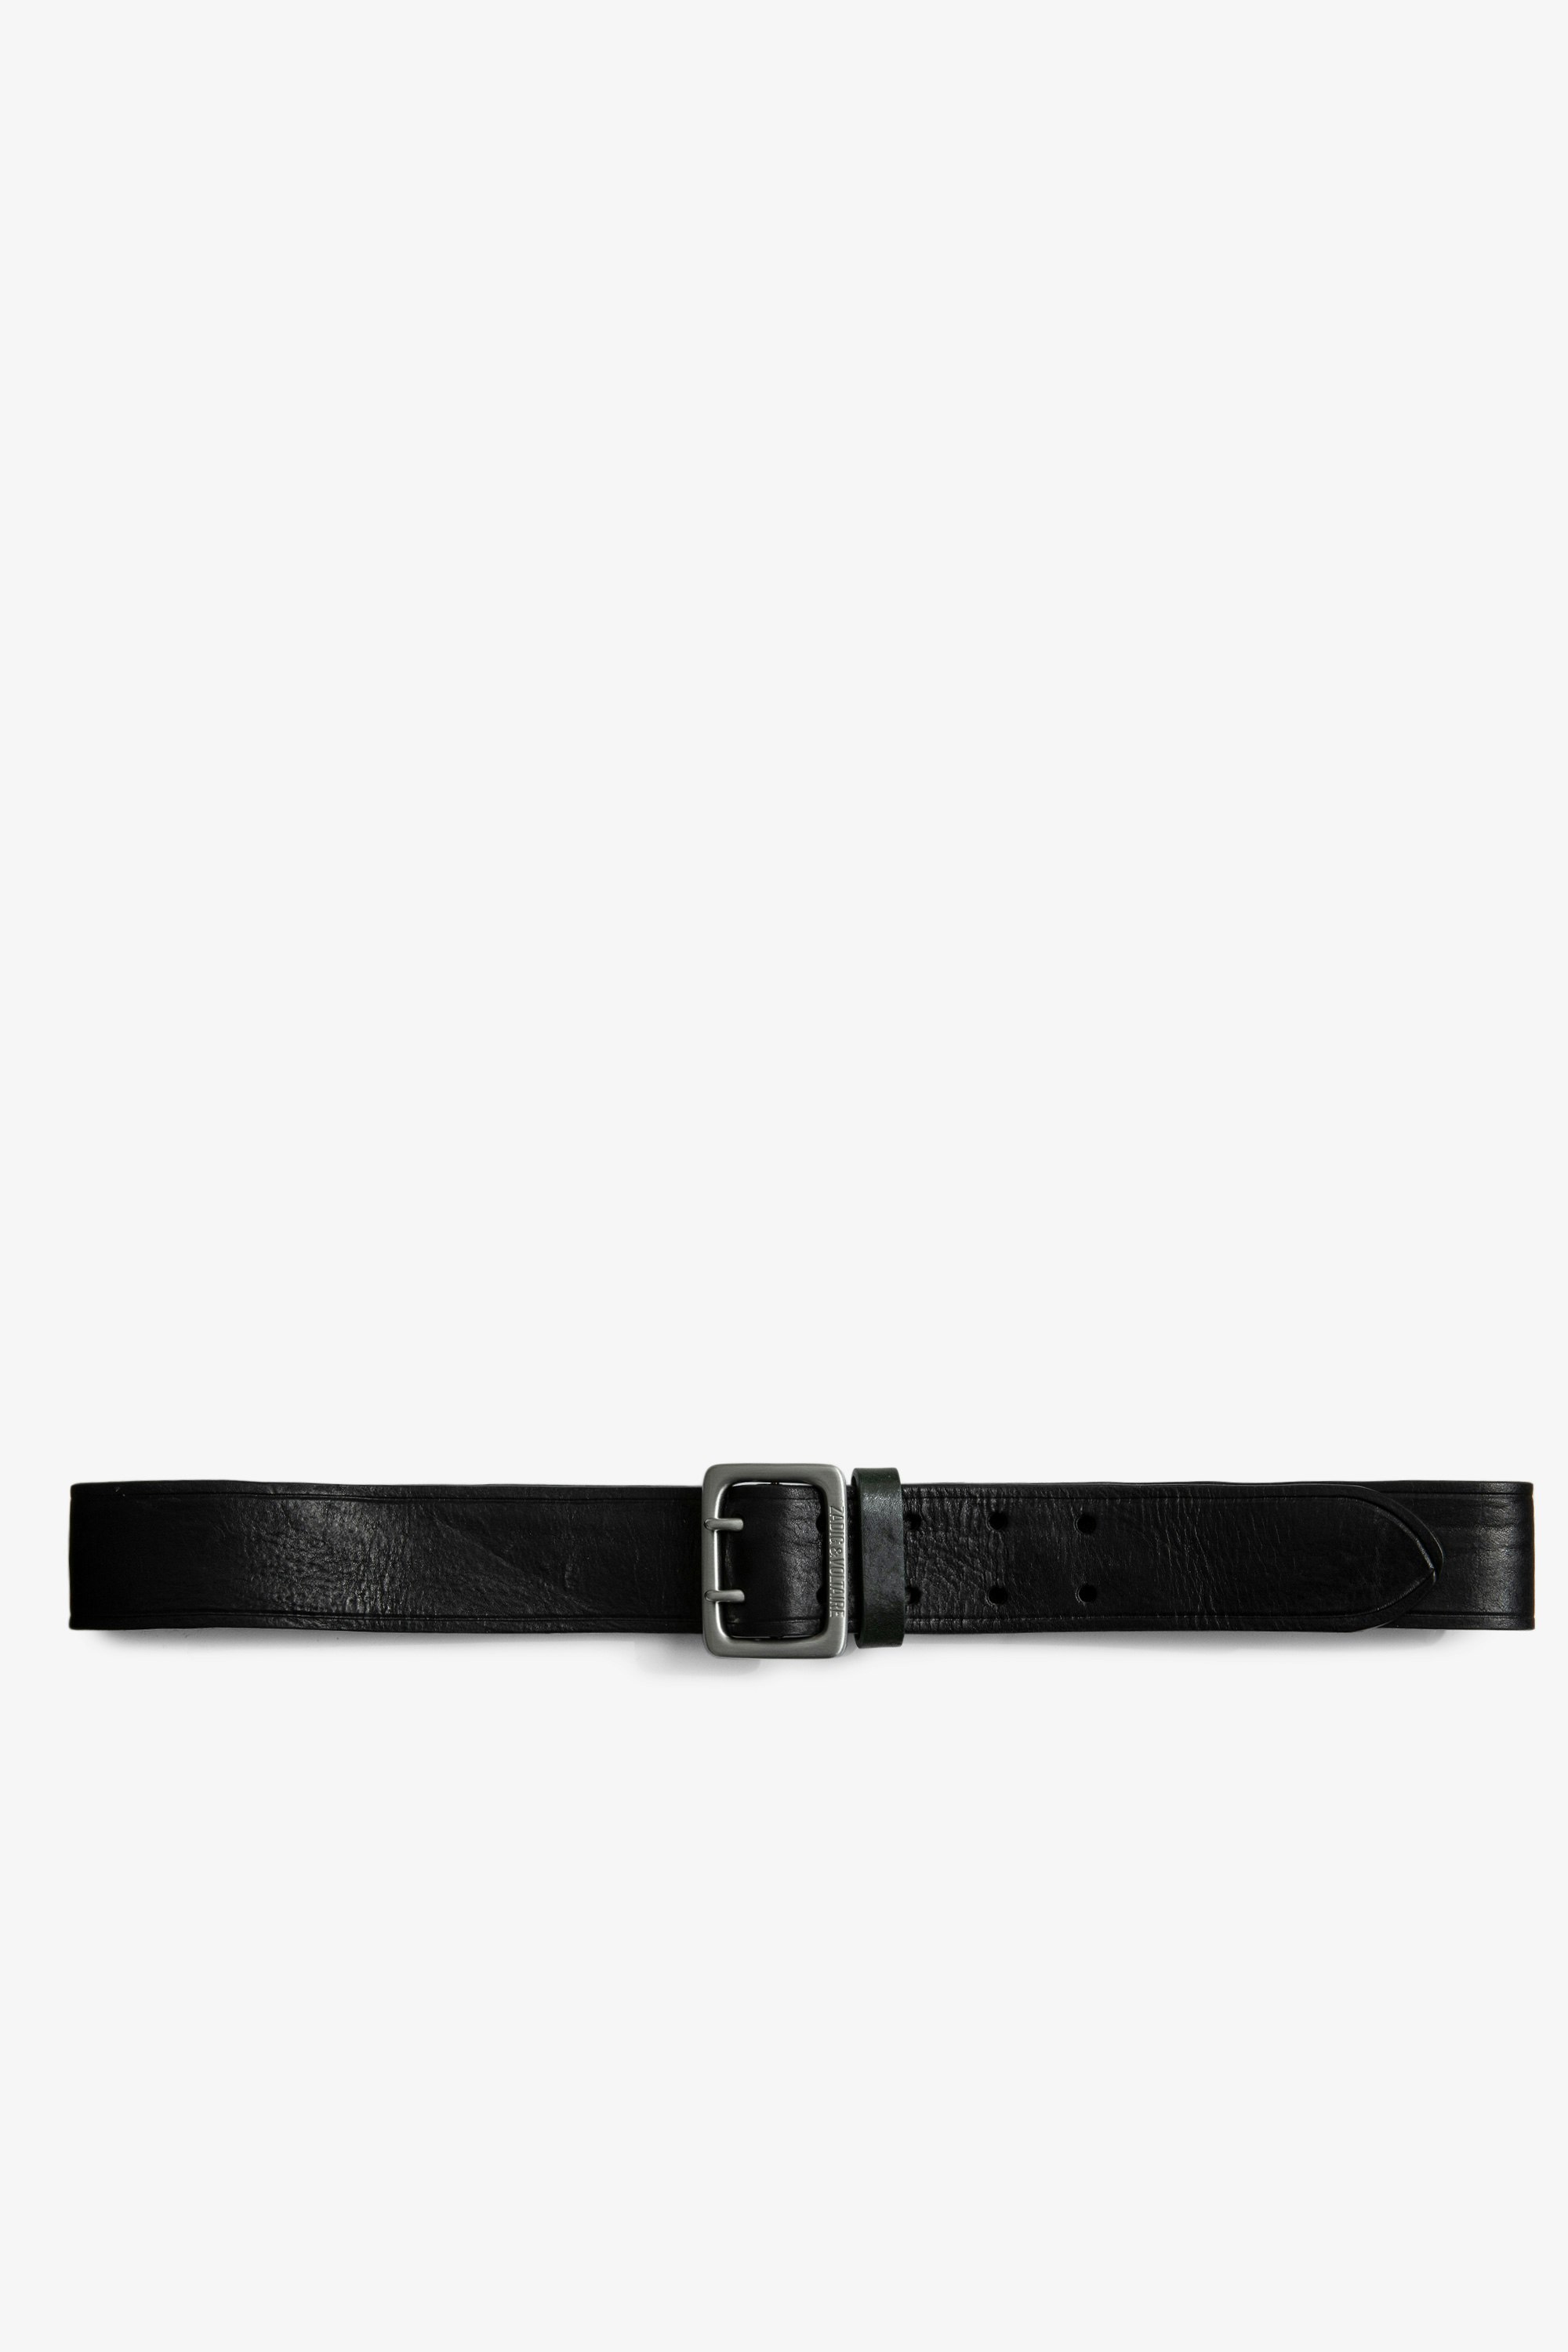 Buckley レザーベルト - Men's black leather belt with silver buckle